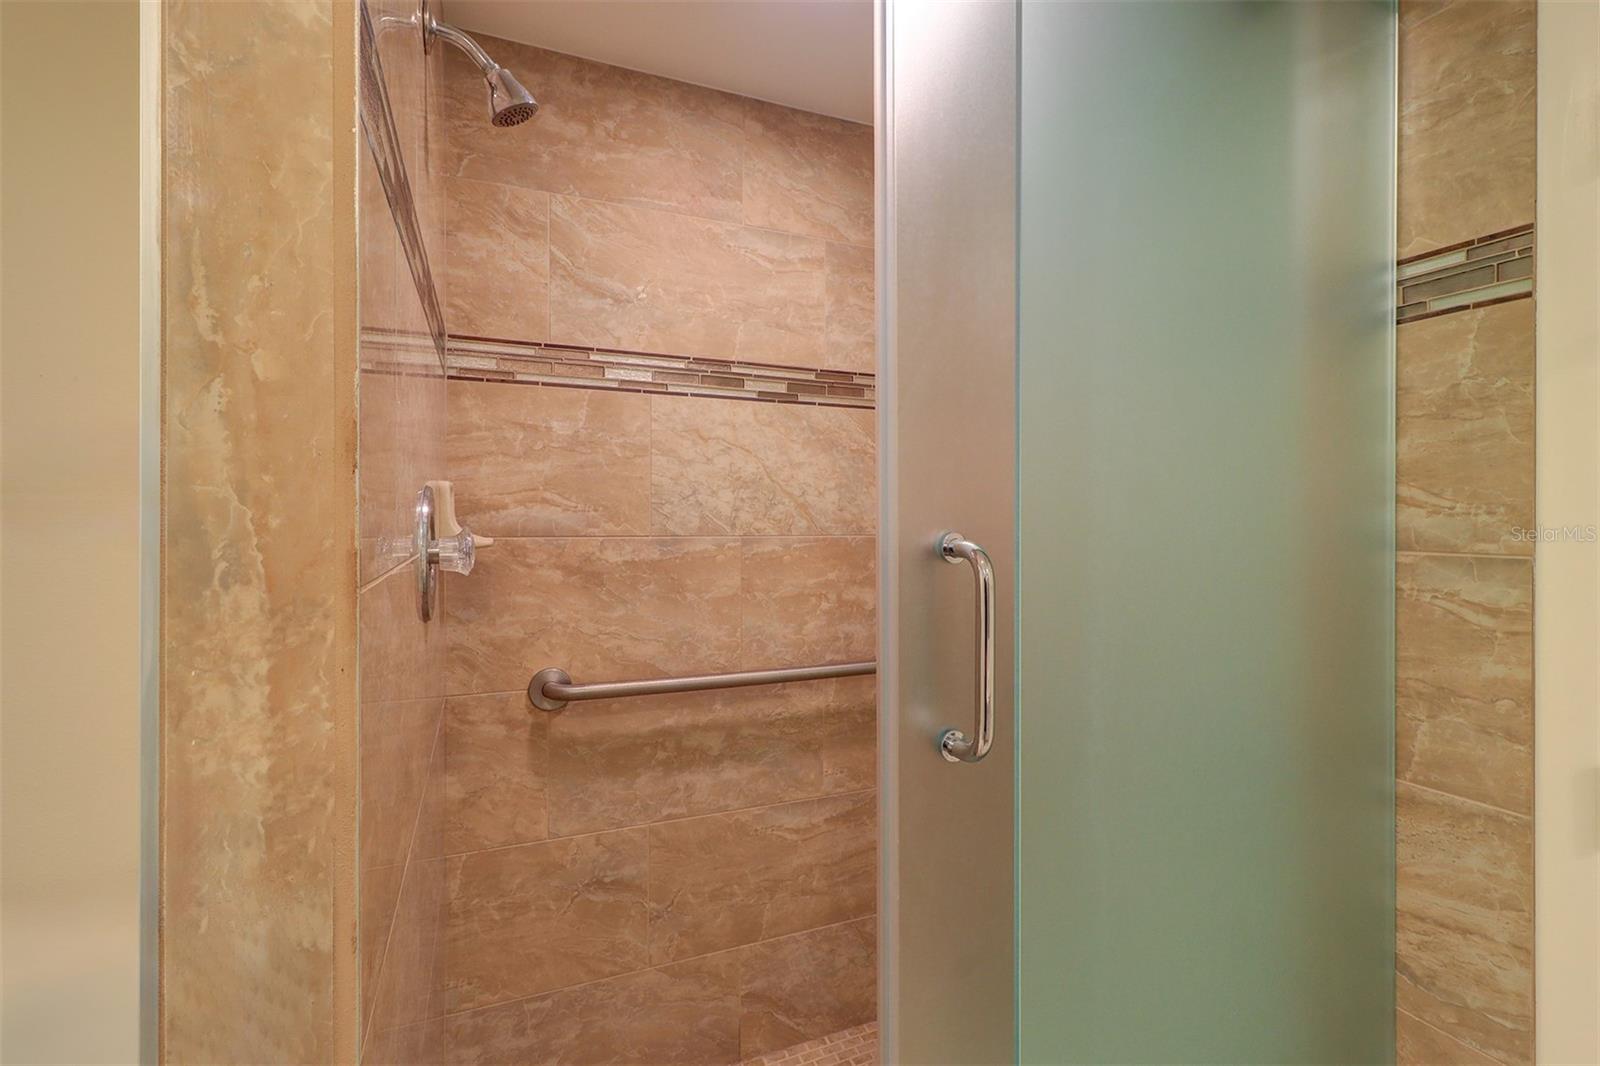 Hall bath shower with glass enclosure